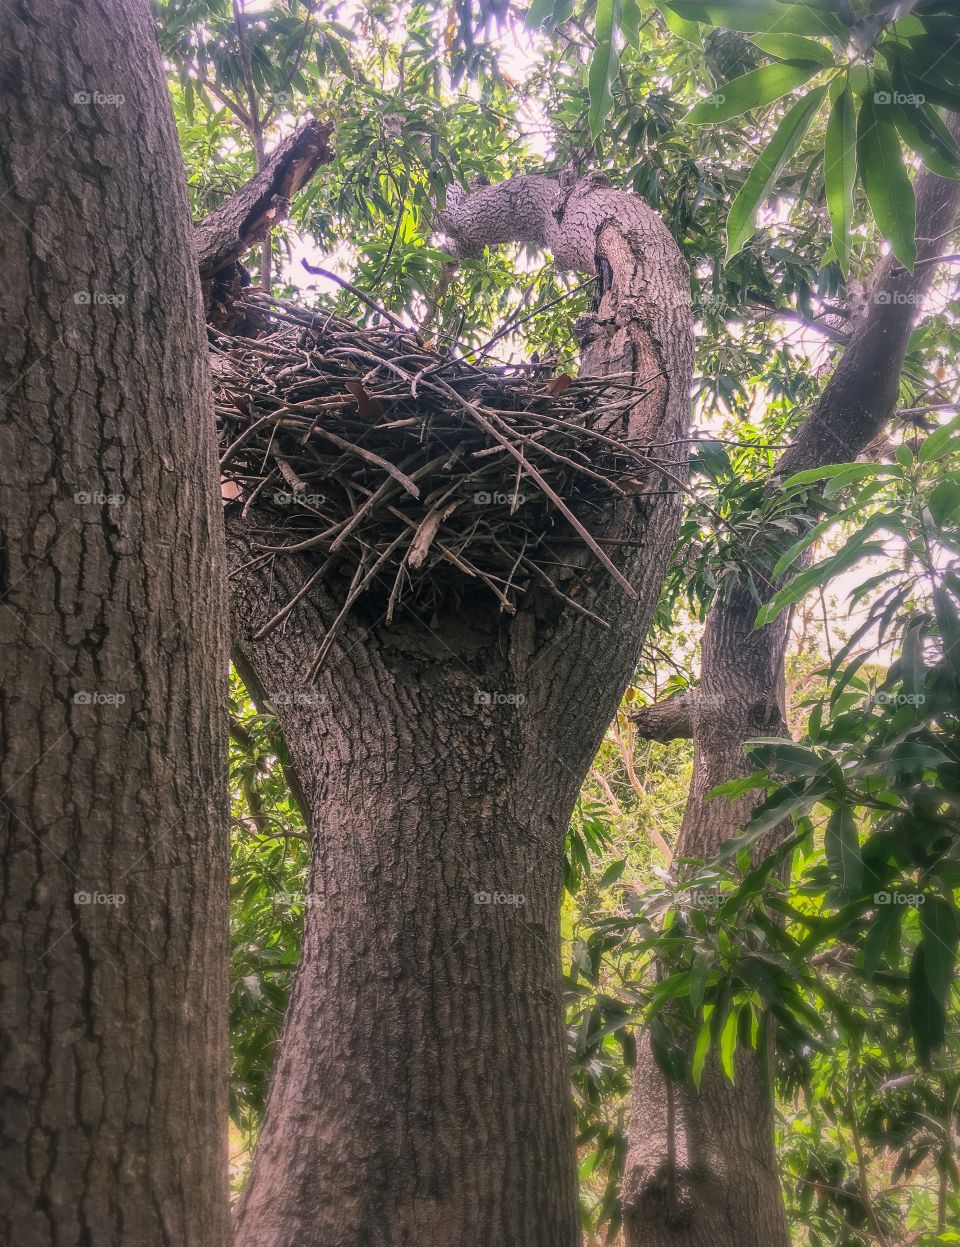 Huge animal-made nest, nestled and crafted in a towering ancient tree in the forest of West Africa.